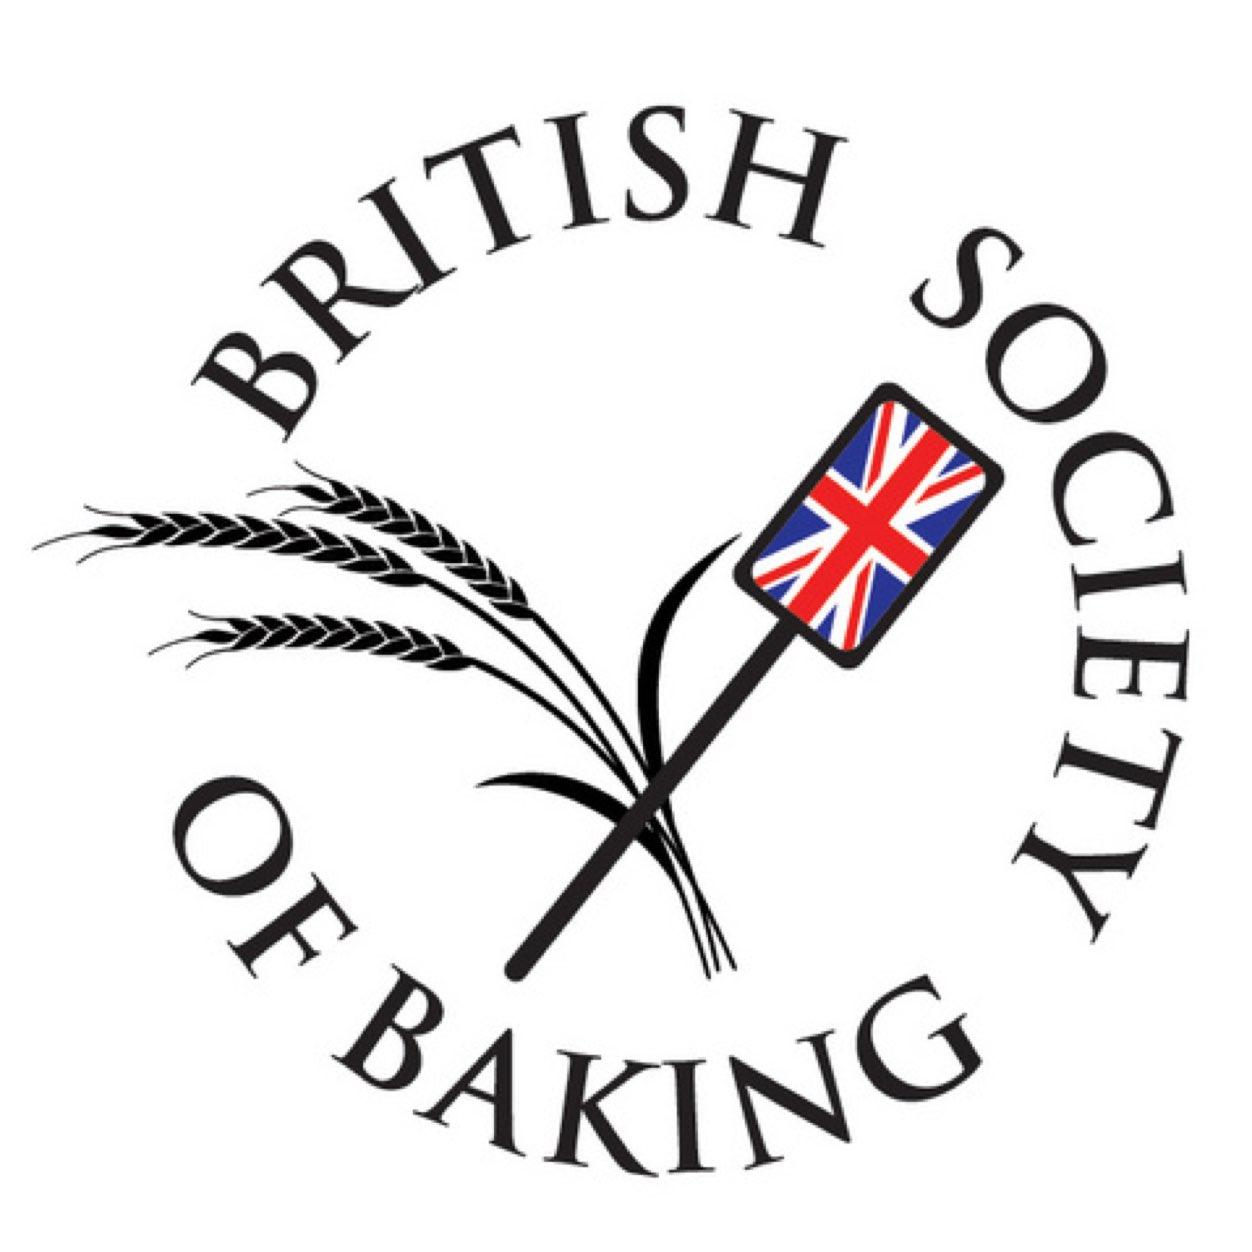 Bringing the baking industry together since 1955. The BSB strives to provide a platform for knowledge sharing, training and affecting change within the industry